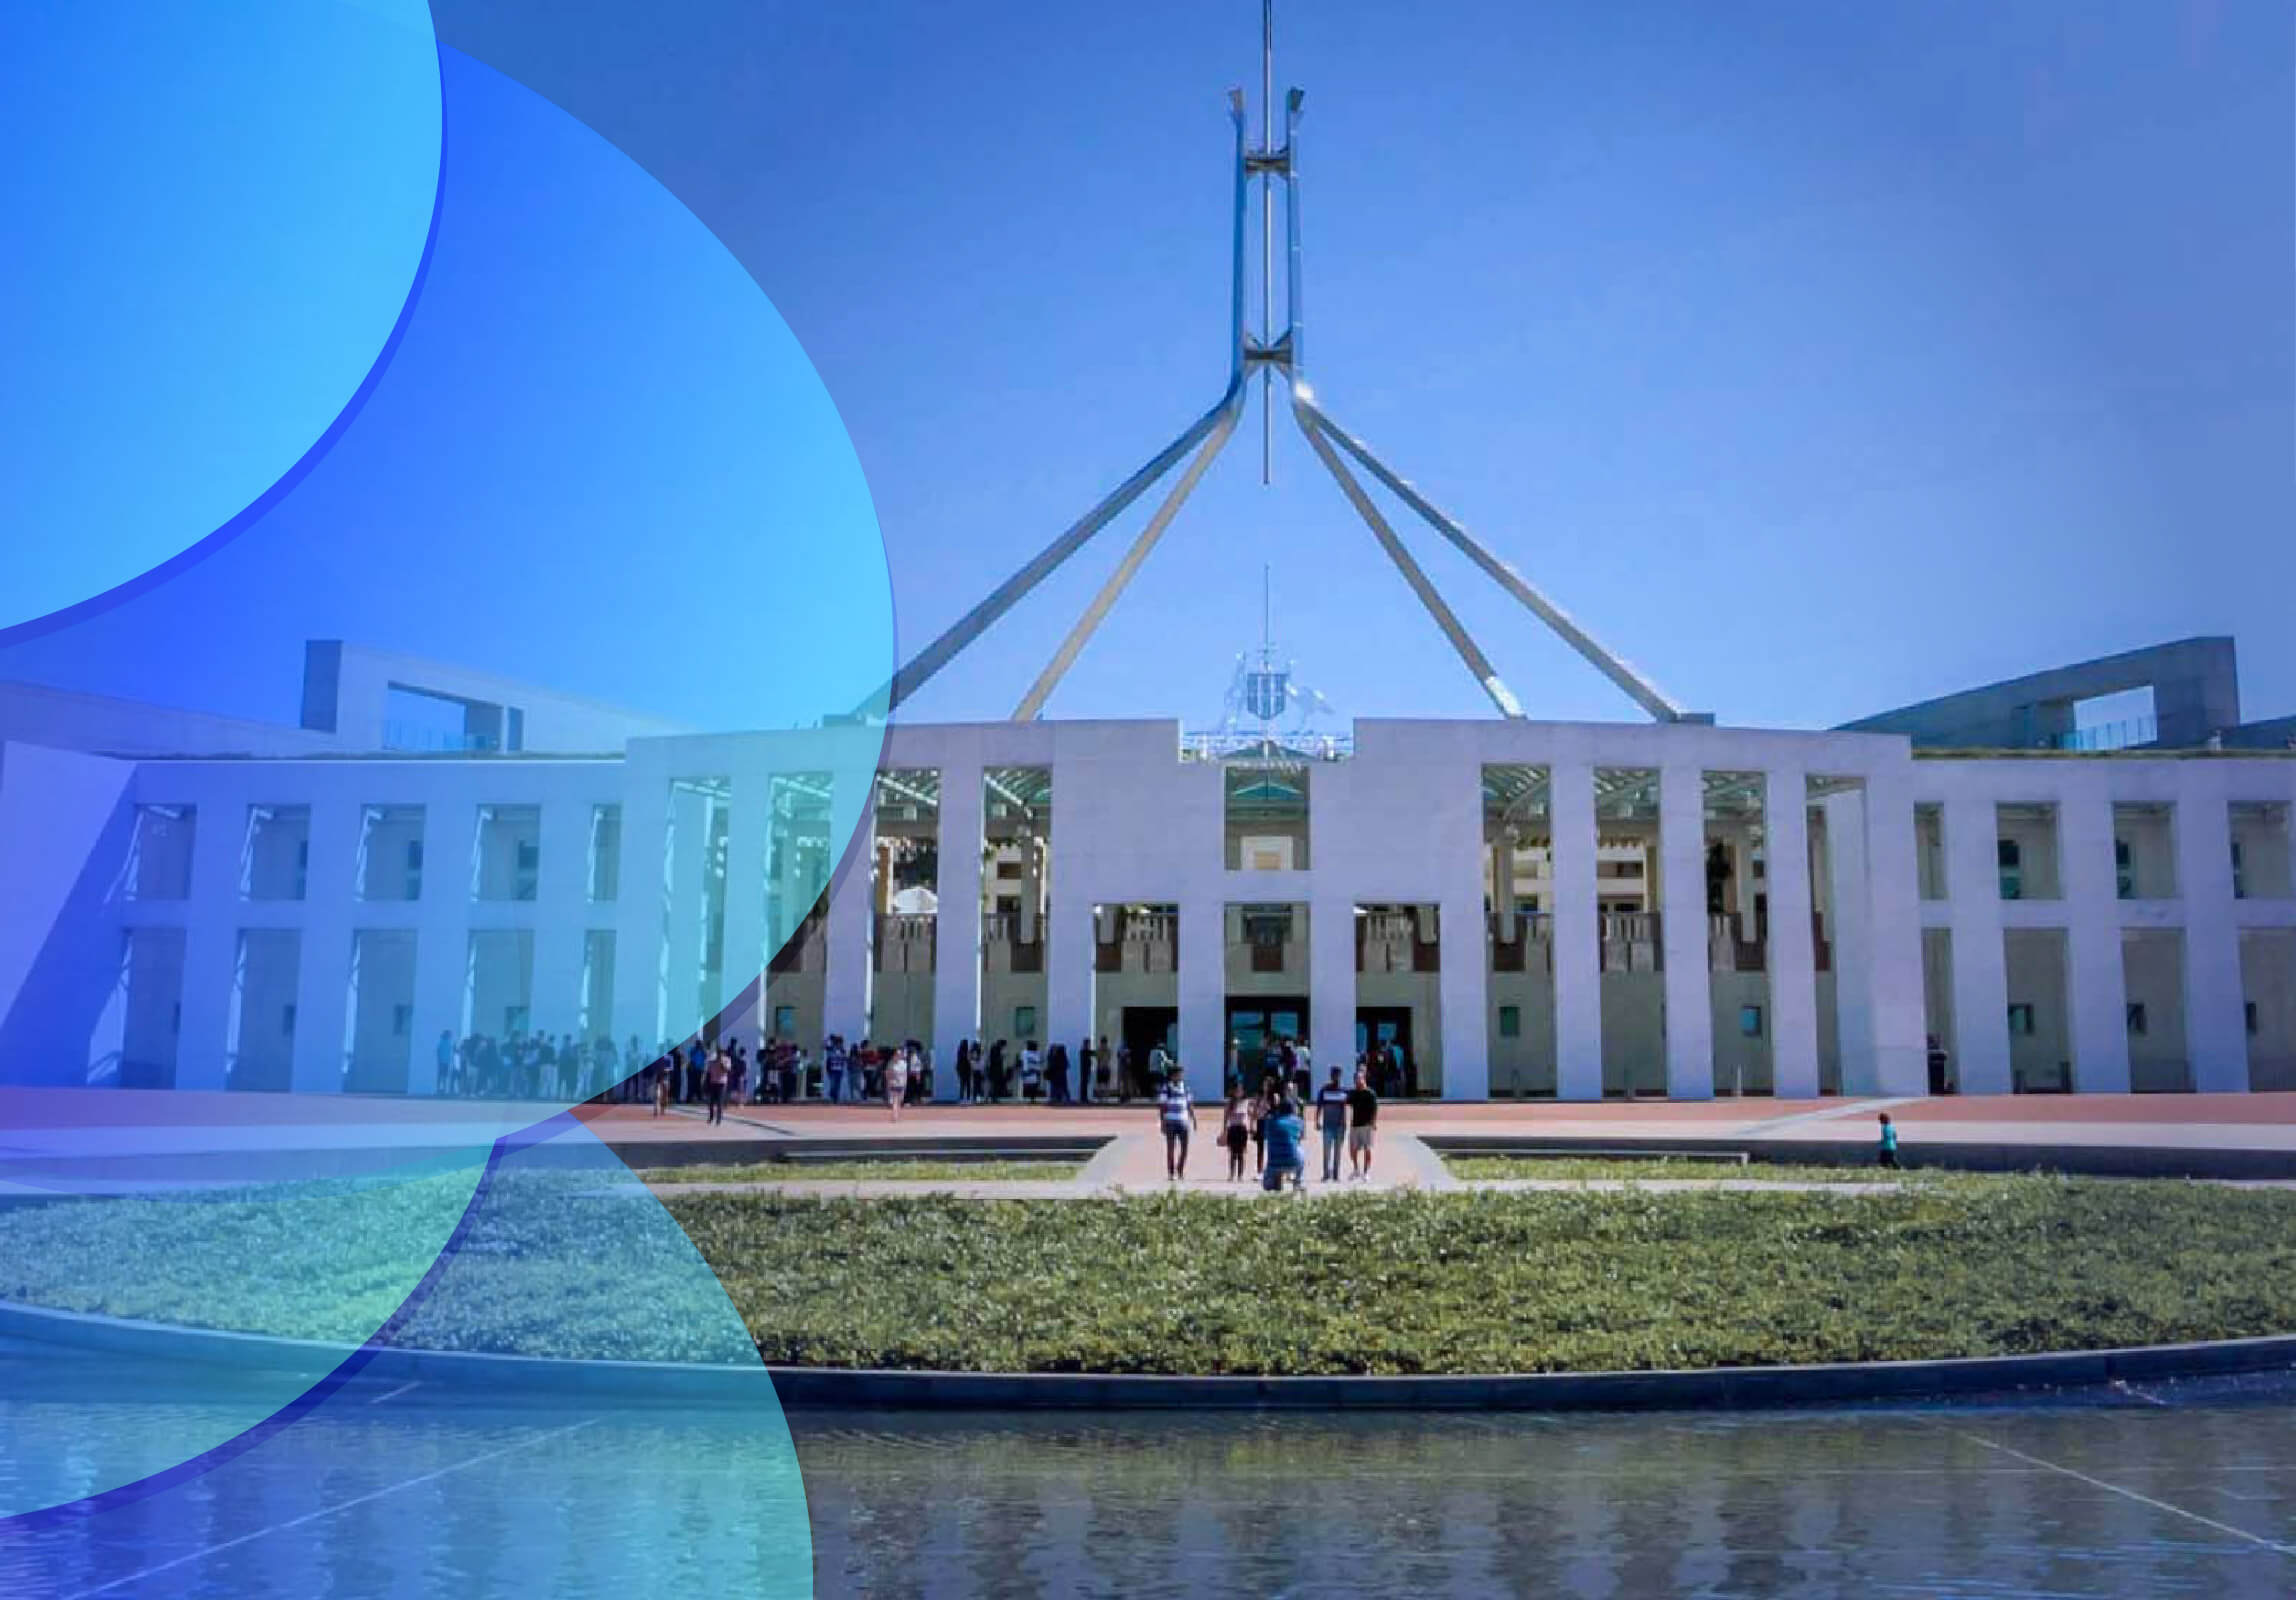 The Australian Parliament building in Canberra